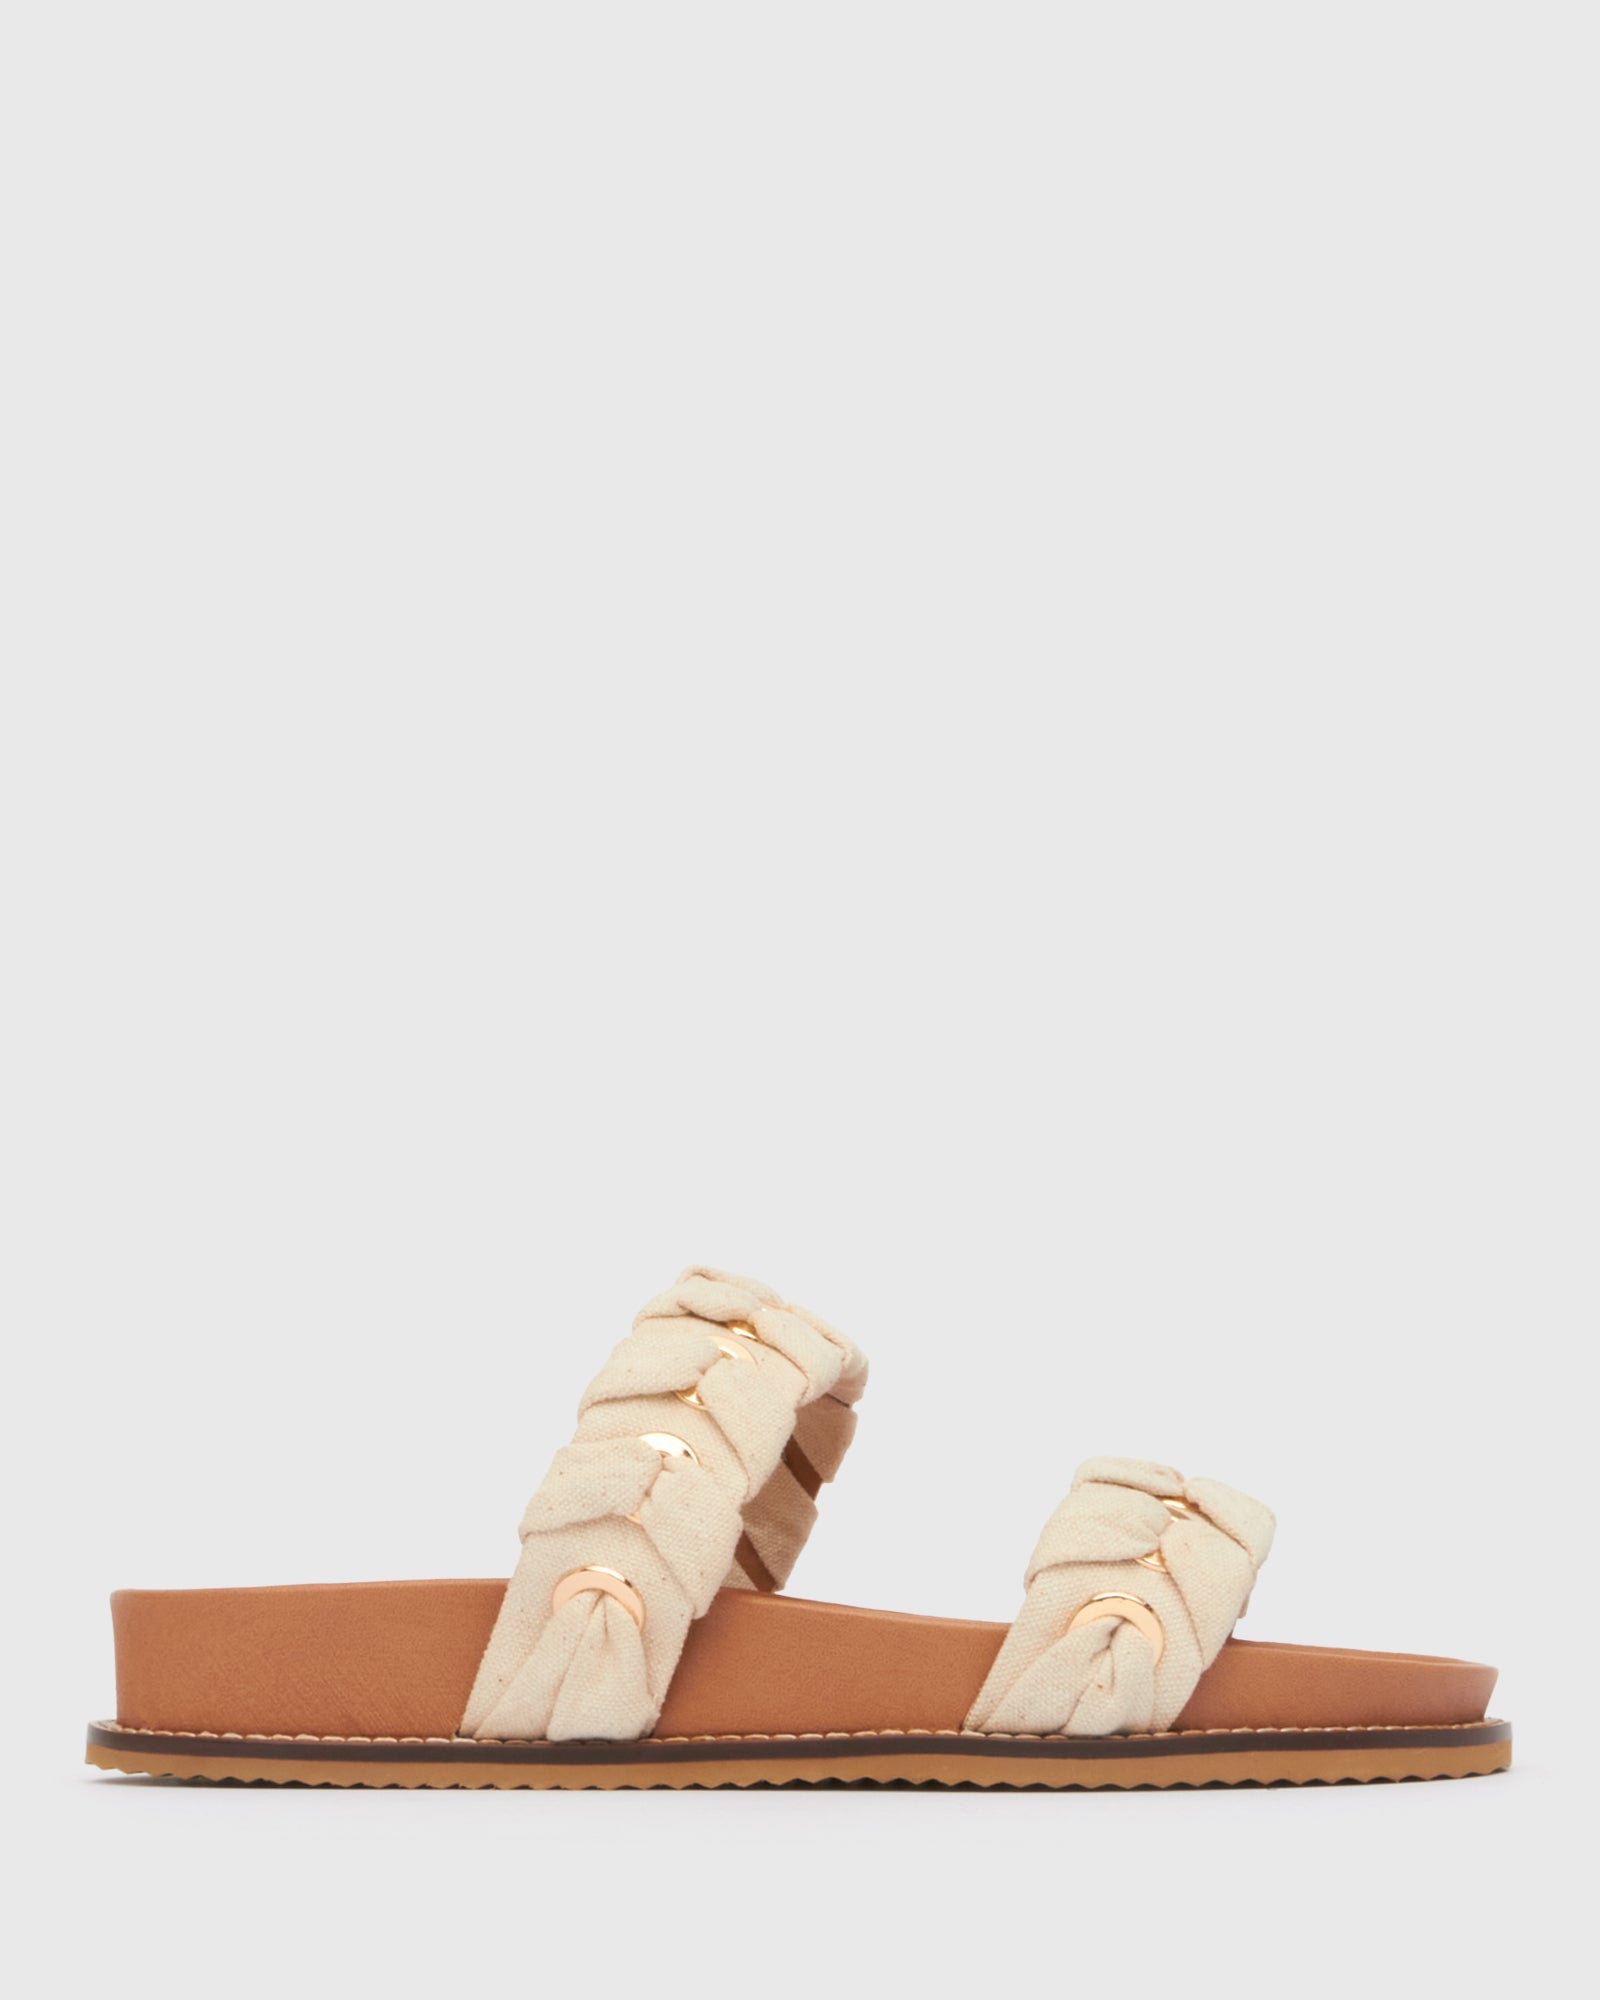 Buy TUVALU Double Band Slides by Betts online - Betts